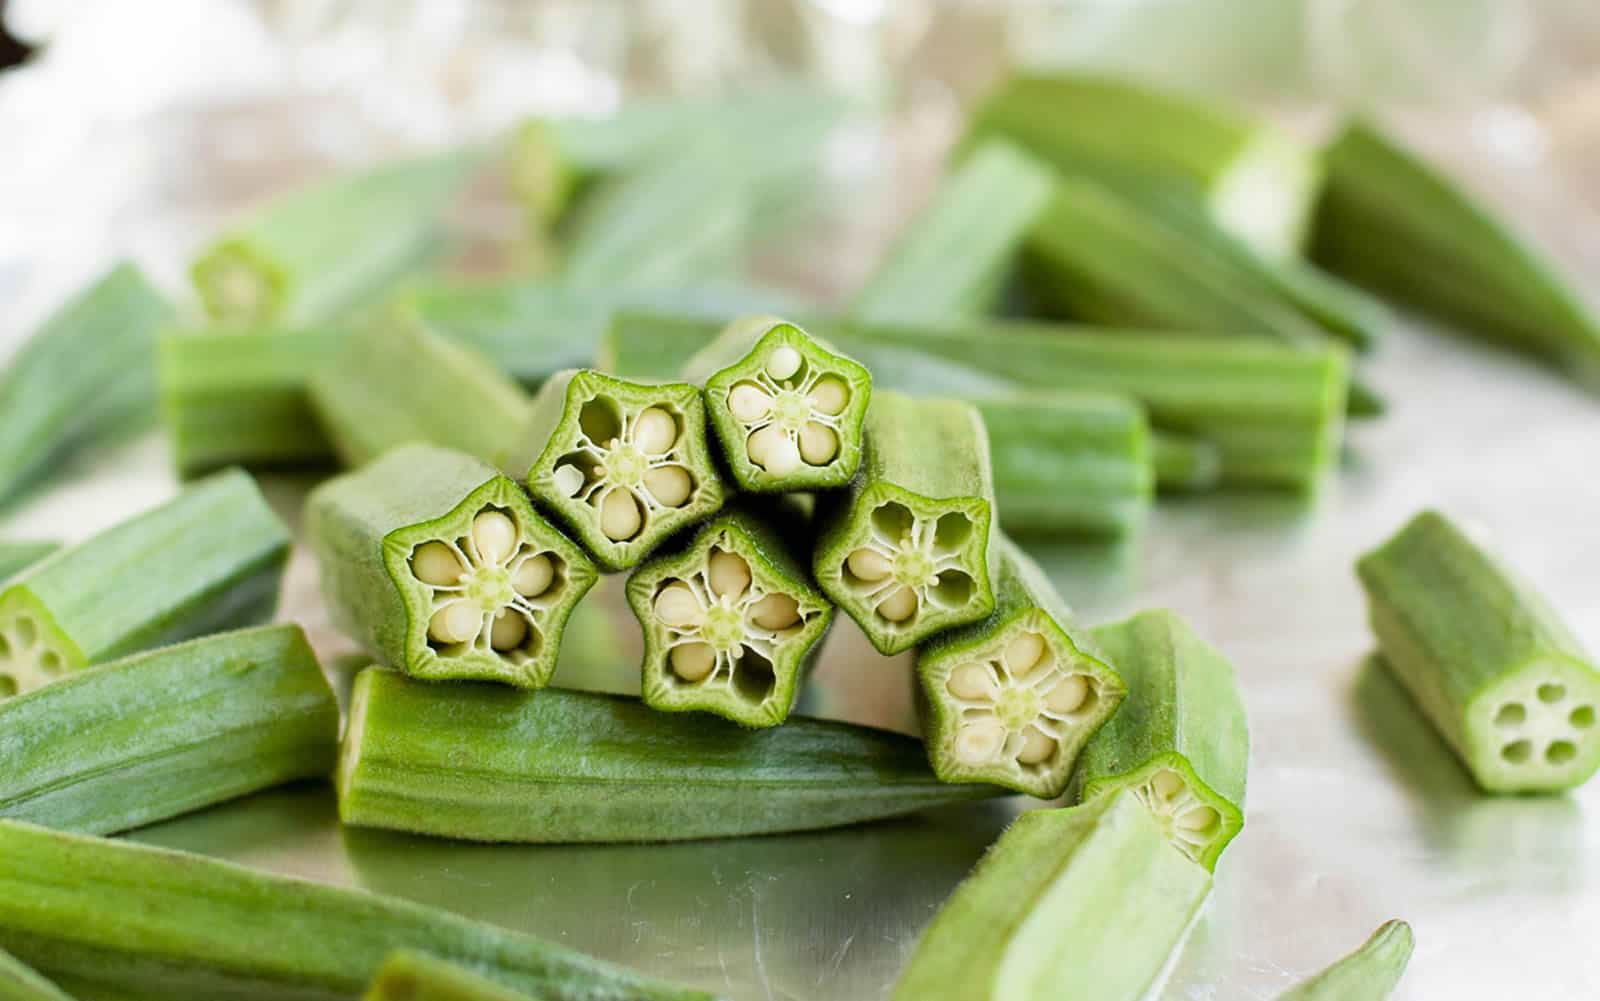 Roasted Okra. The easy way to prep this sometimes tricky vegetable. Just roast with olive oil, salt and pepper for a delicious snack, appetizer or side!